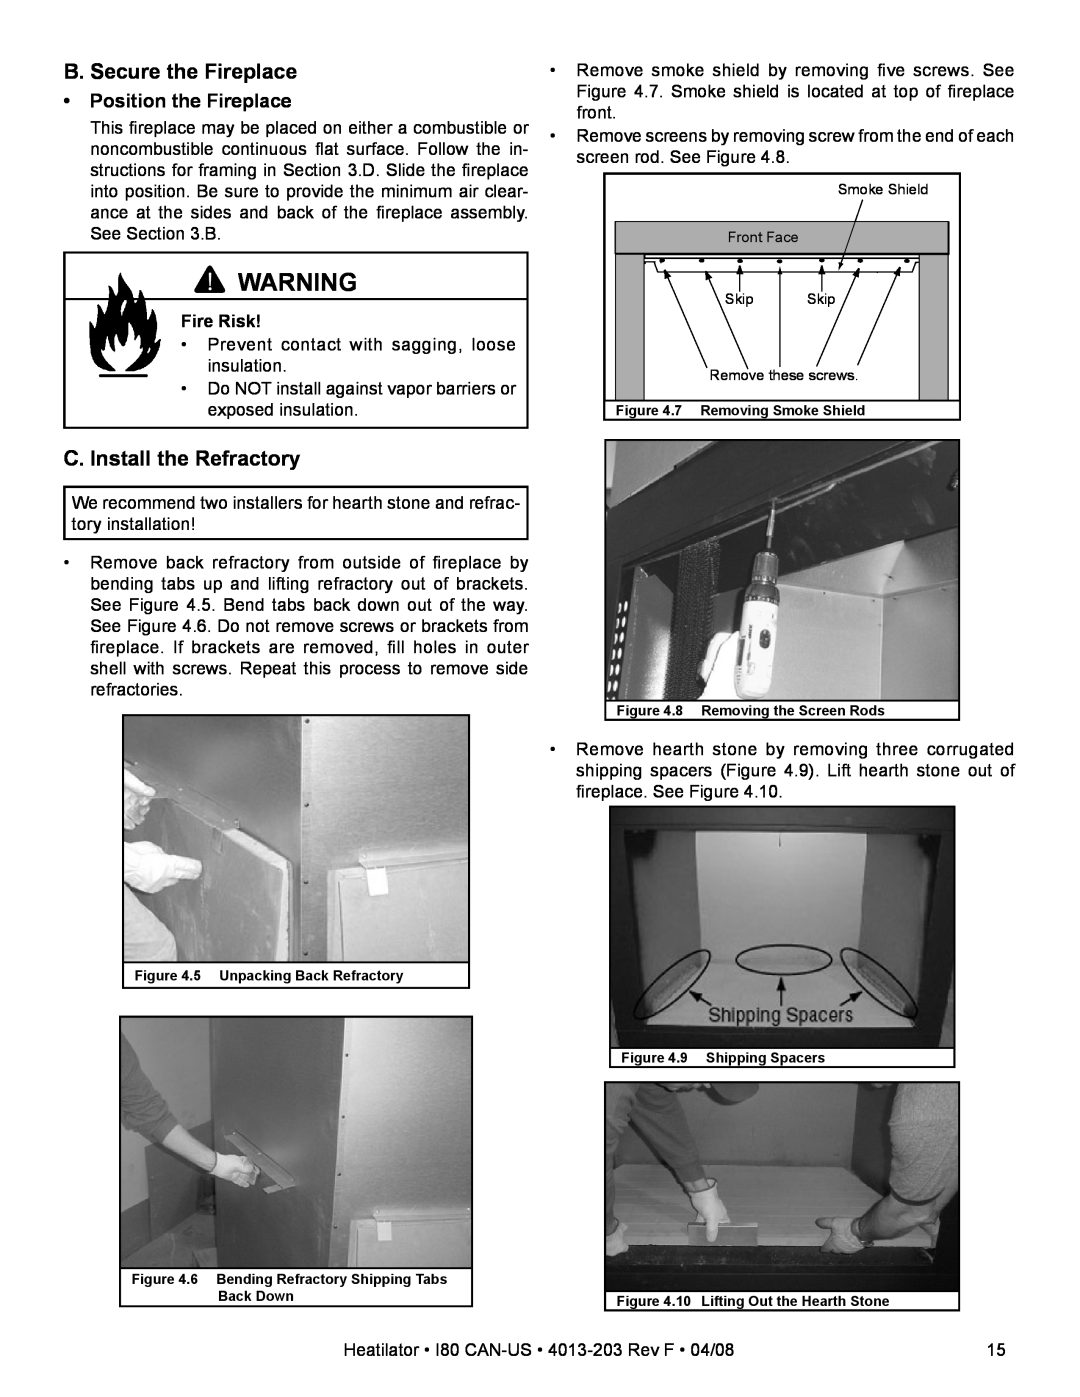 Heatiator I80 owner manual B. Secure the Fireplace, C. Install the Refractory, Position the Fireplace, Fire Risk 